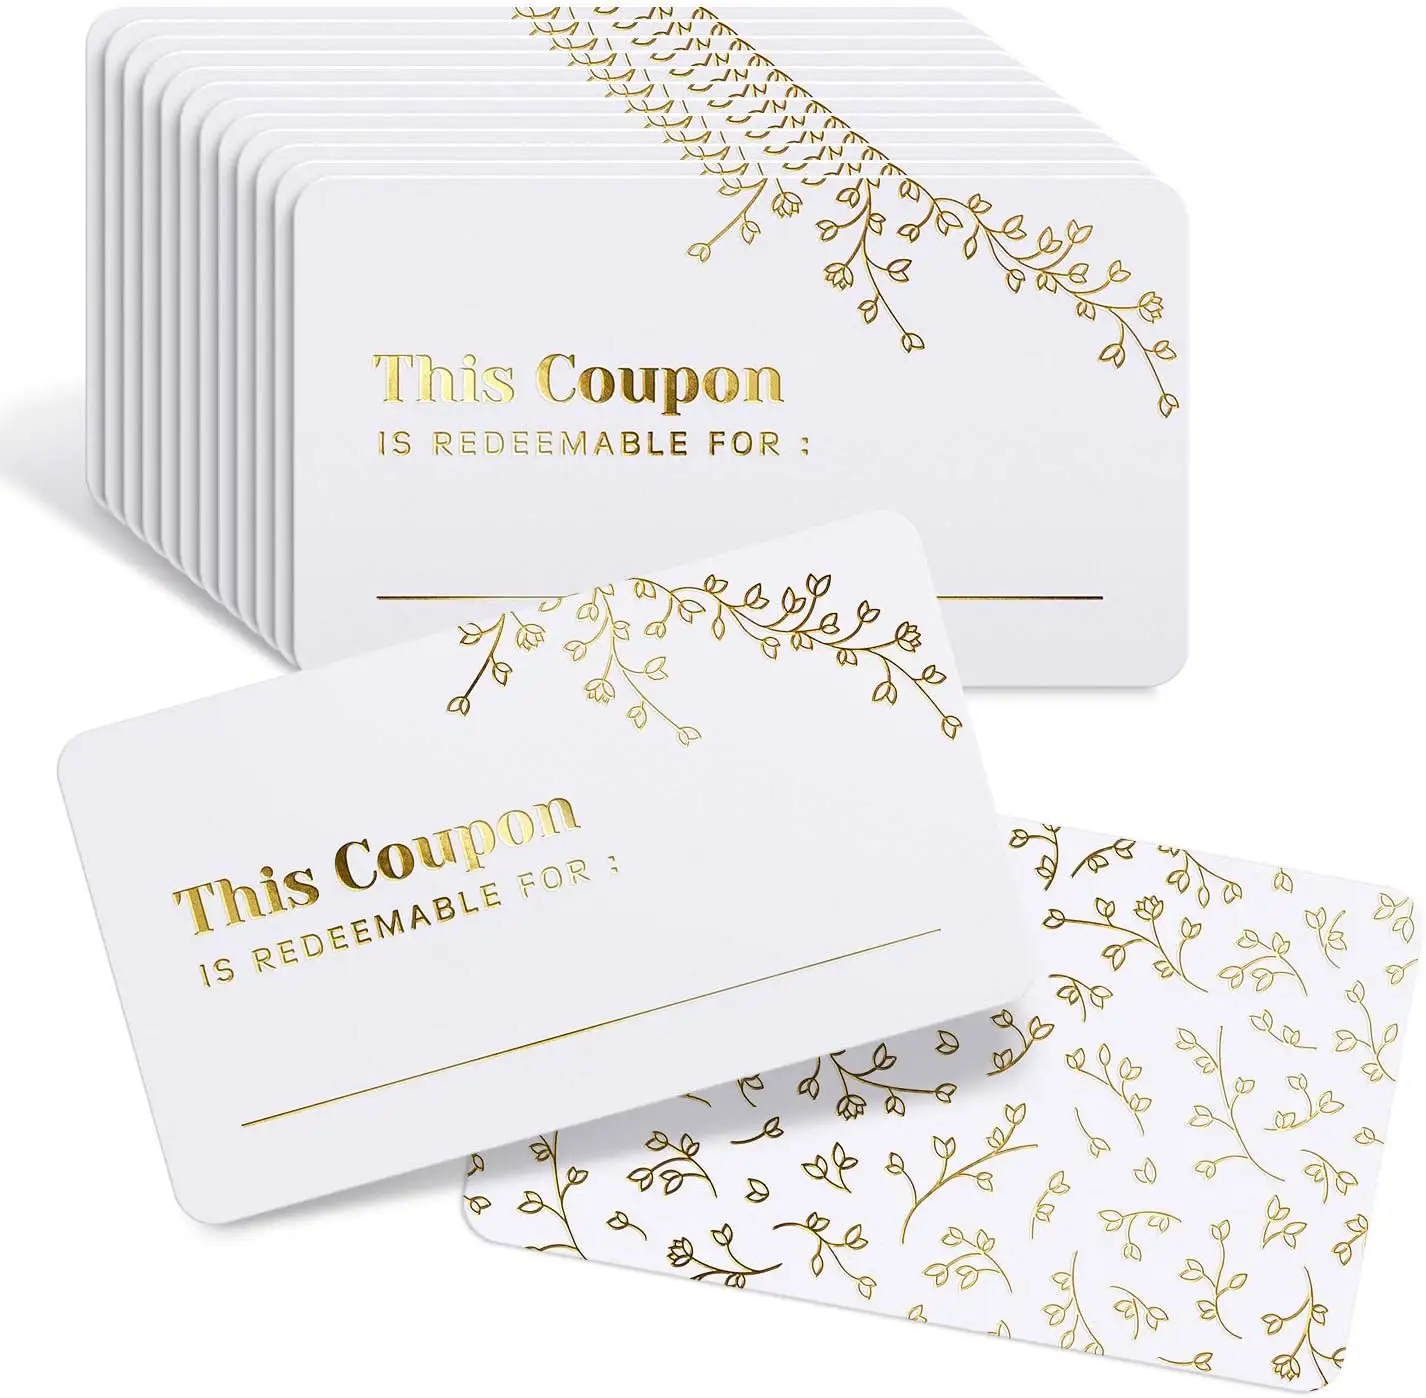 Personalized design high quality custom printing gift coupon for gift certificates vouchers emplolyee appreciation gift